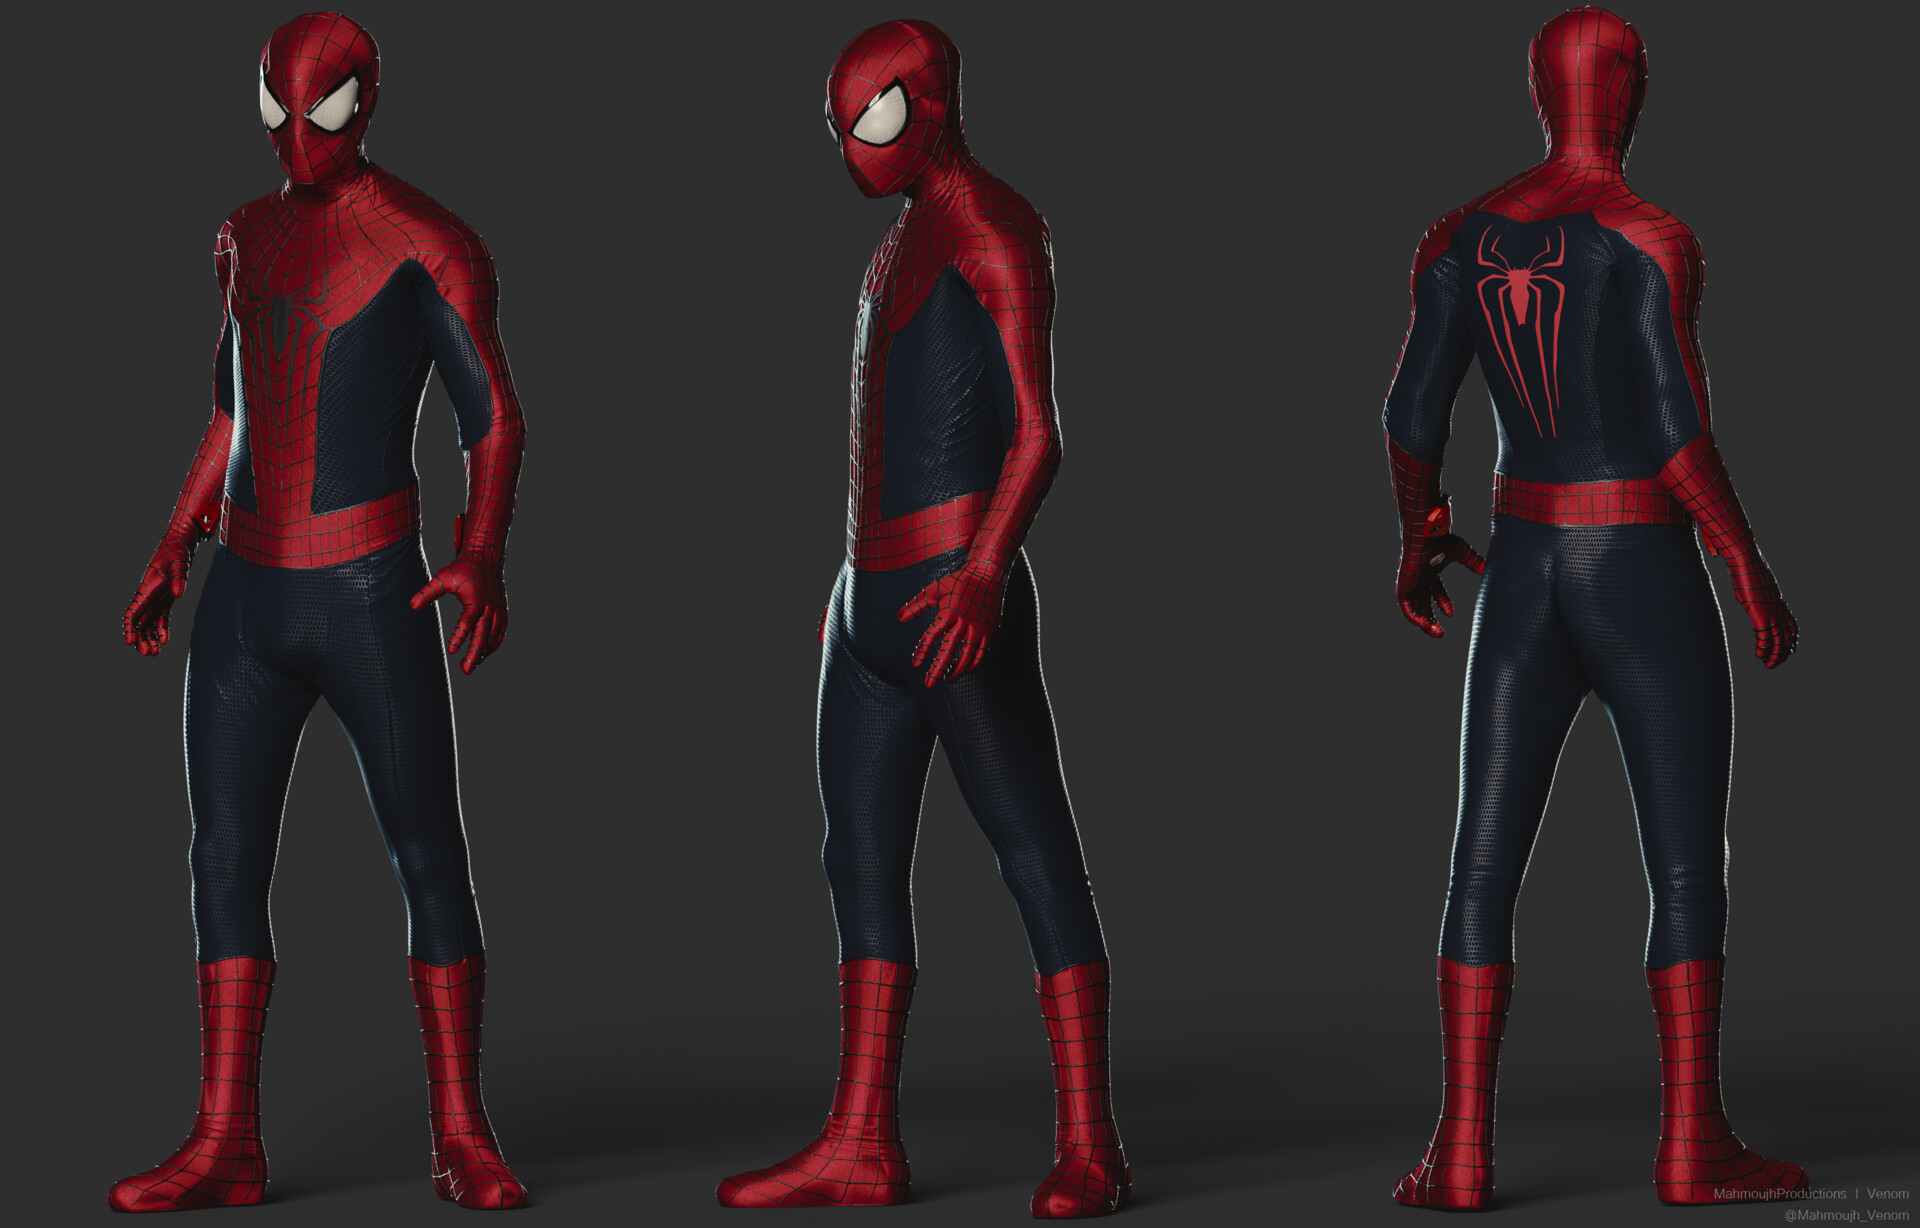 The Amazing Spider-Man 2 suit: PS4 skin by Soyelmejor999 on DeviantArt